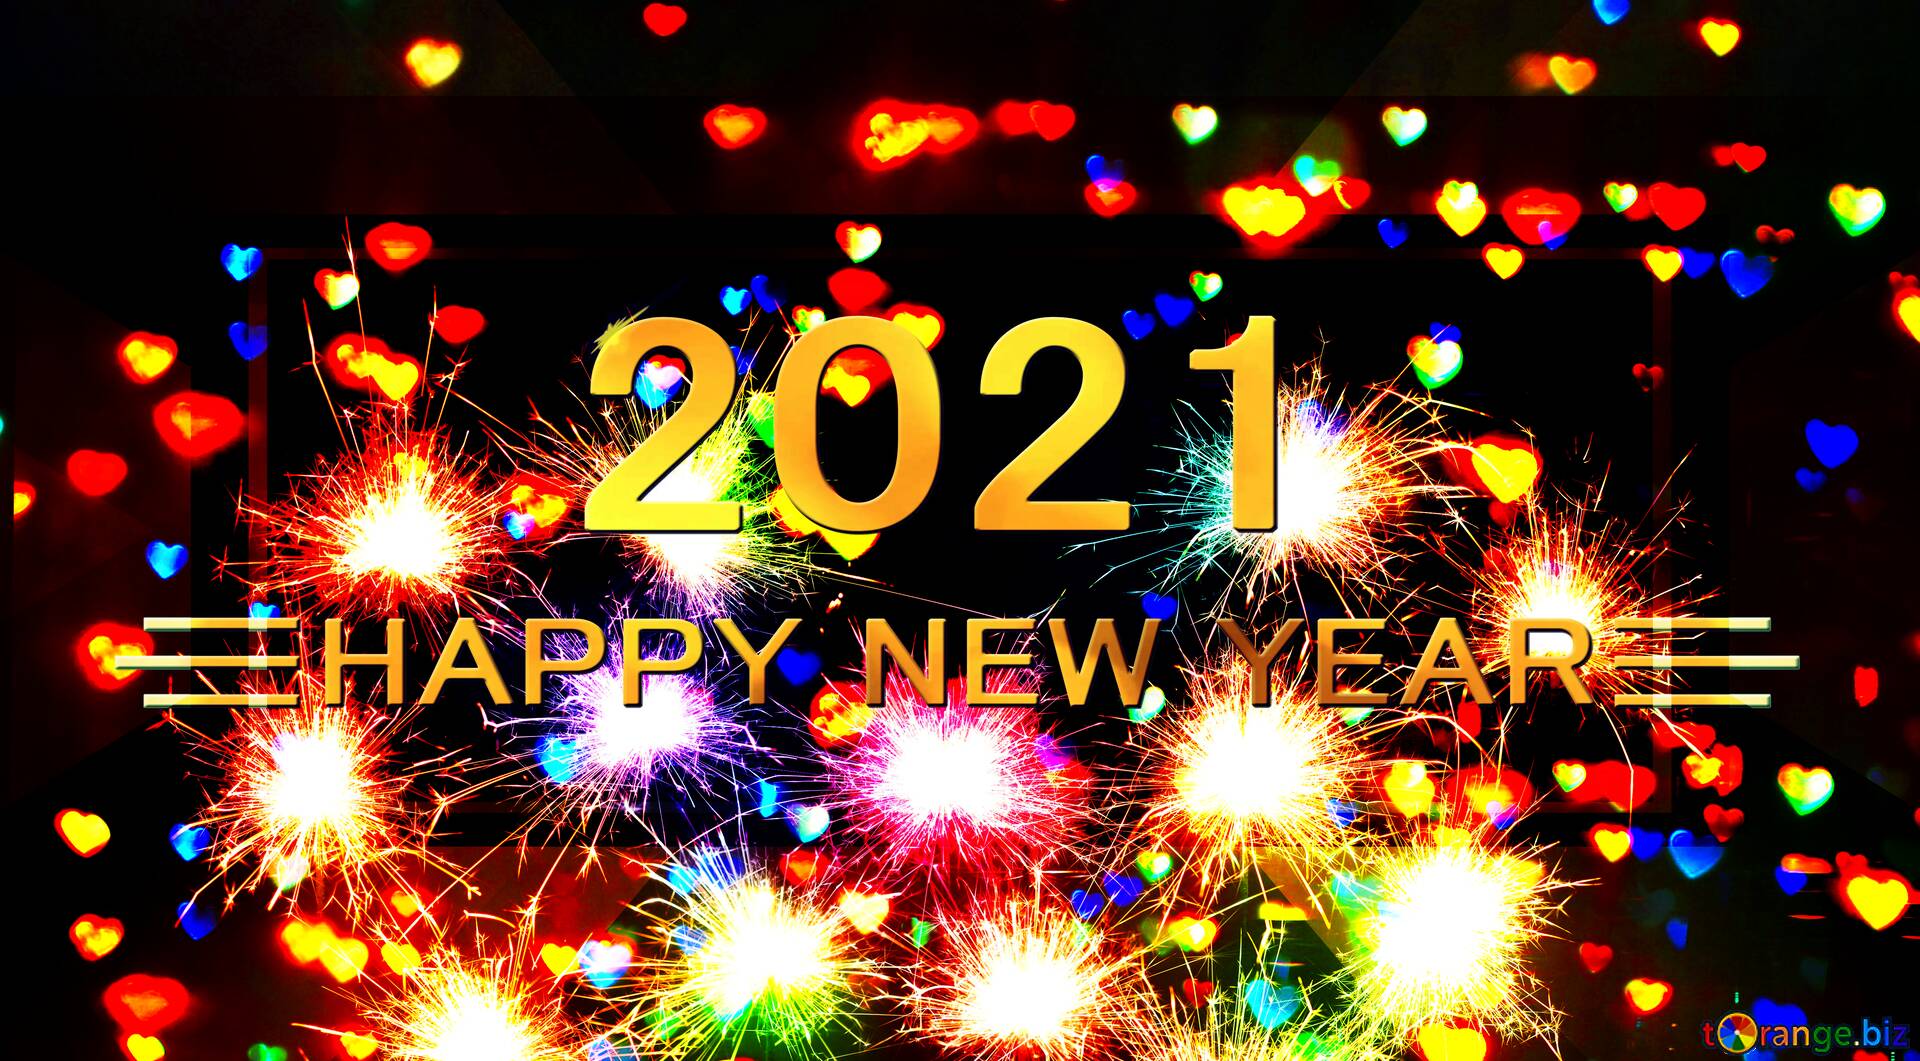 Top HD} Happy New Year 2021 Image >! Picture, Wallpaper Download